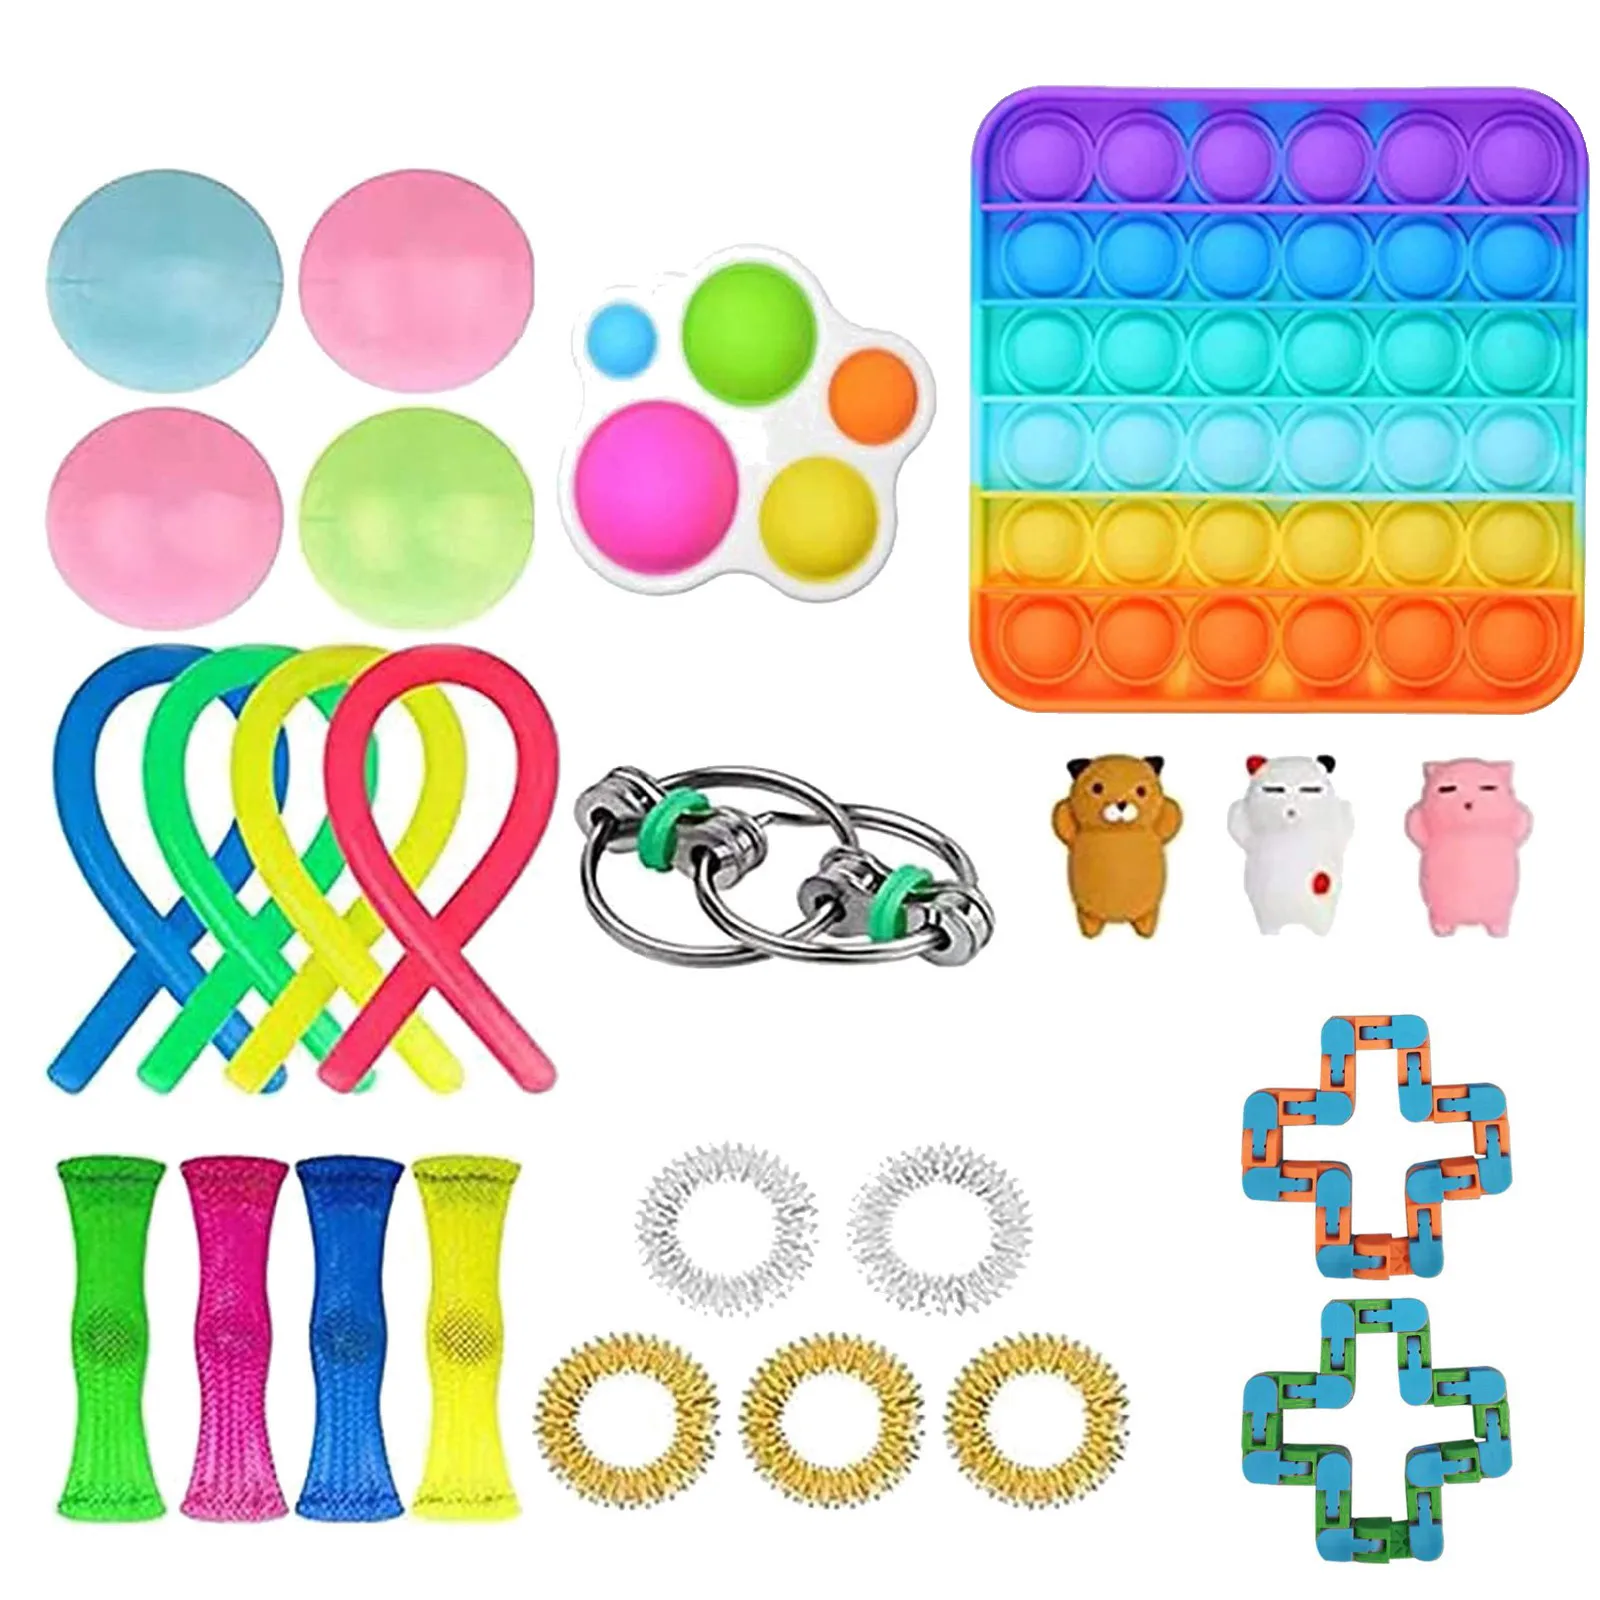 

1set Pop Toys Anti Stress Set Stretchy Strings Toys Gift Pack For Adults Kids Squishy Sensory Antistress Relief Pop Toys Vip